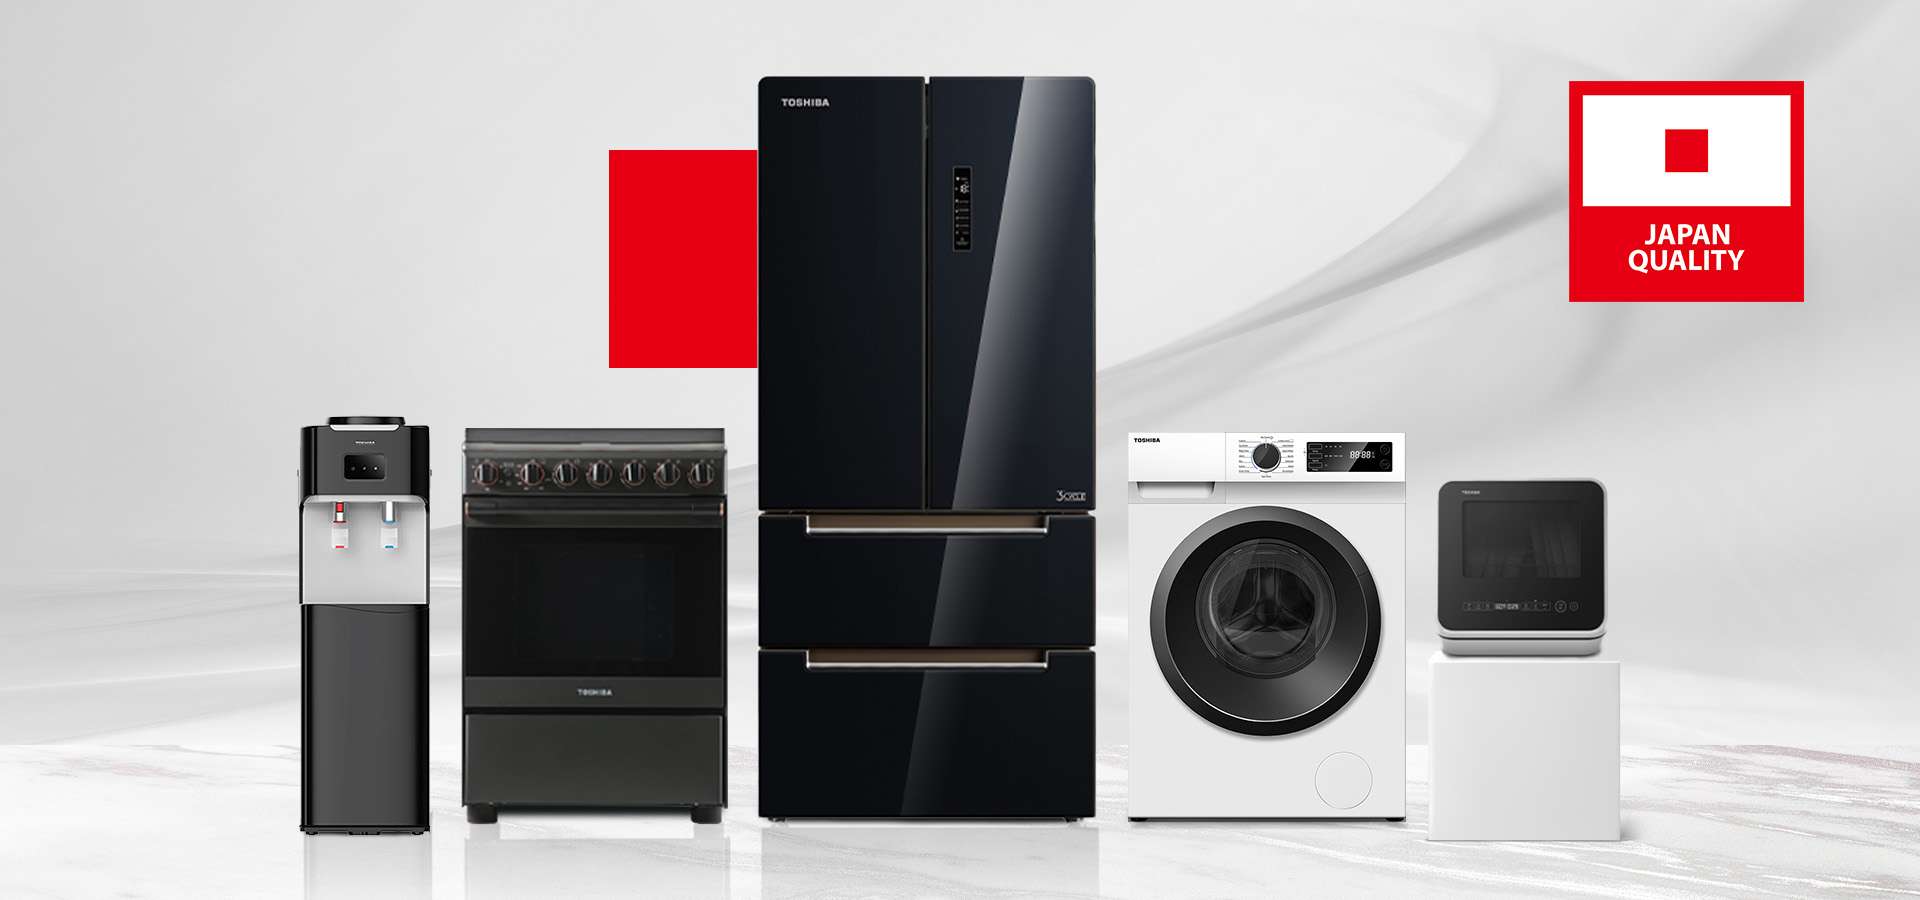 These appliances are expertly engineered to provide ease for every space and function. Include them in your culinary routine day in and day out to enjoy world-class comfort and daily convenience.